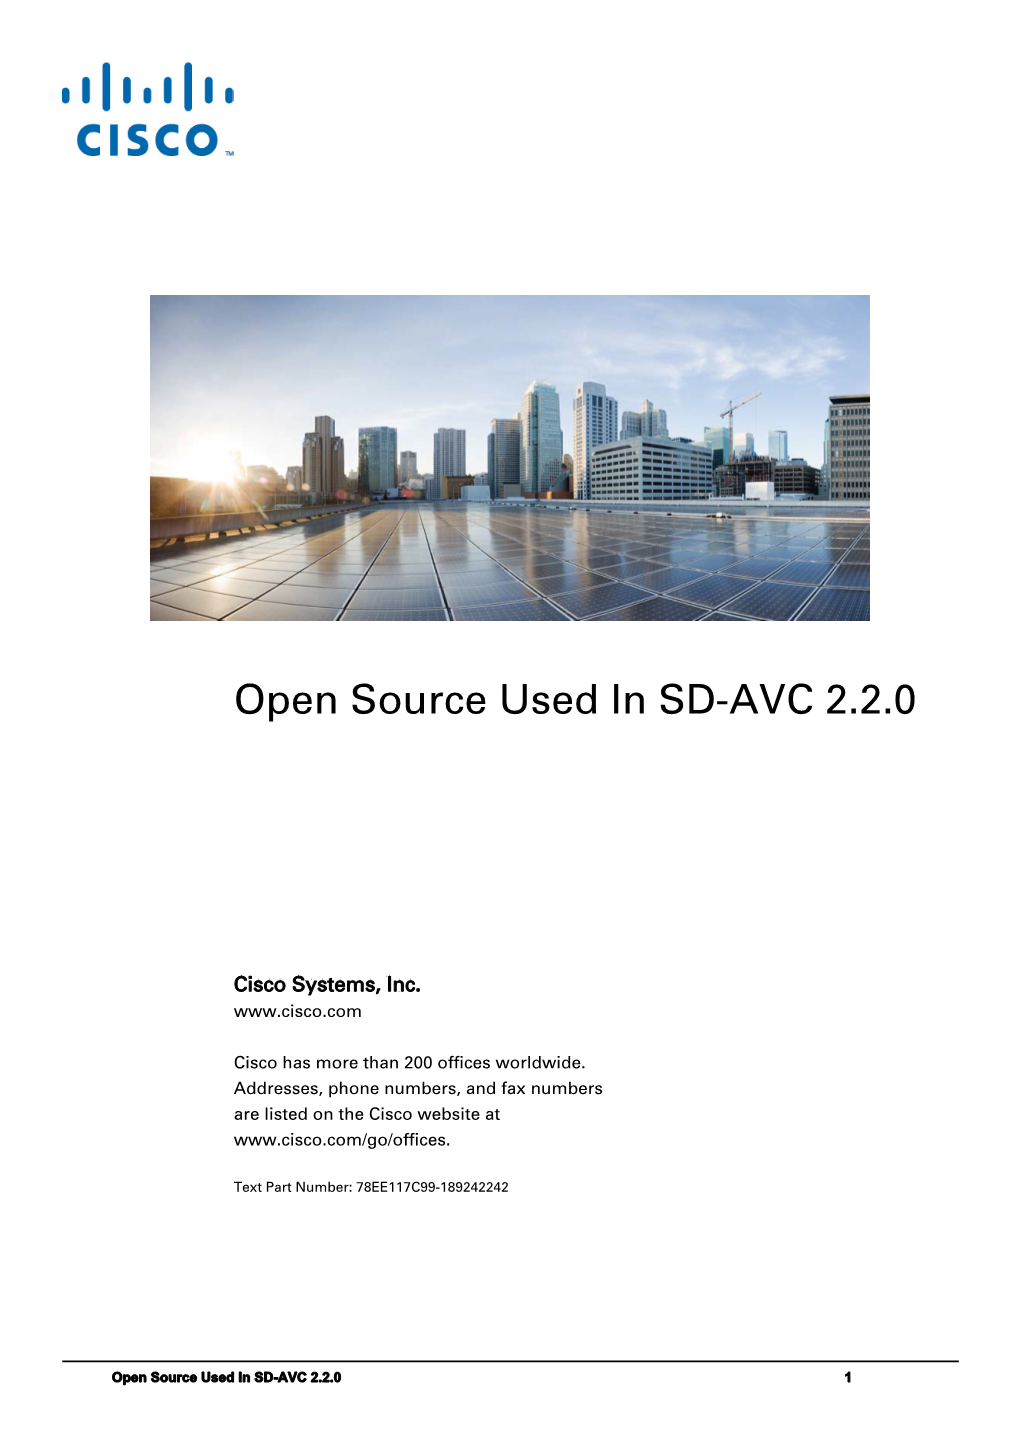 Open Source Used in SD-AVC 2.2.0